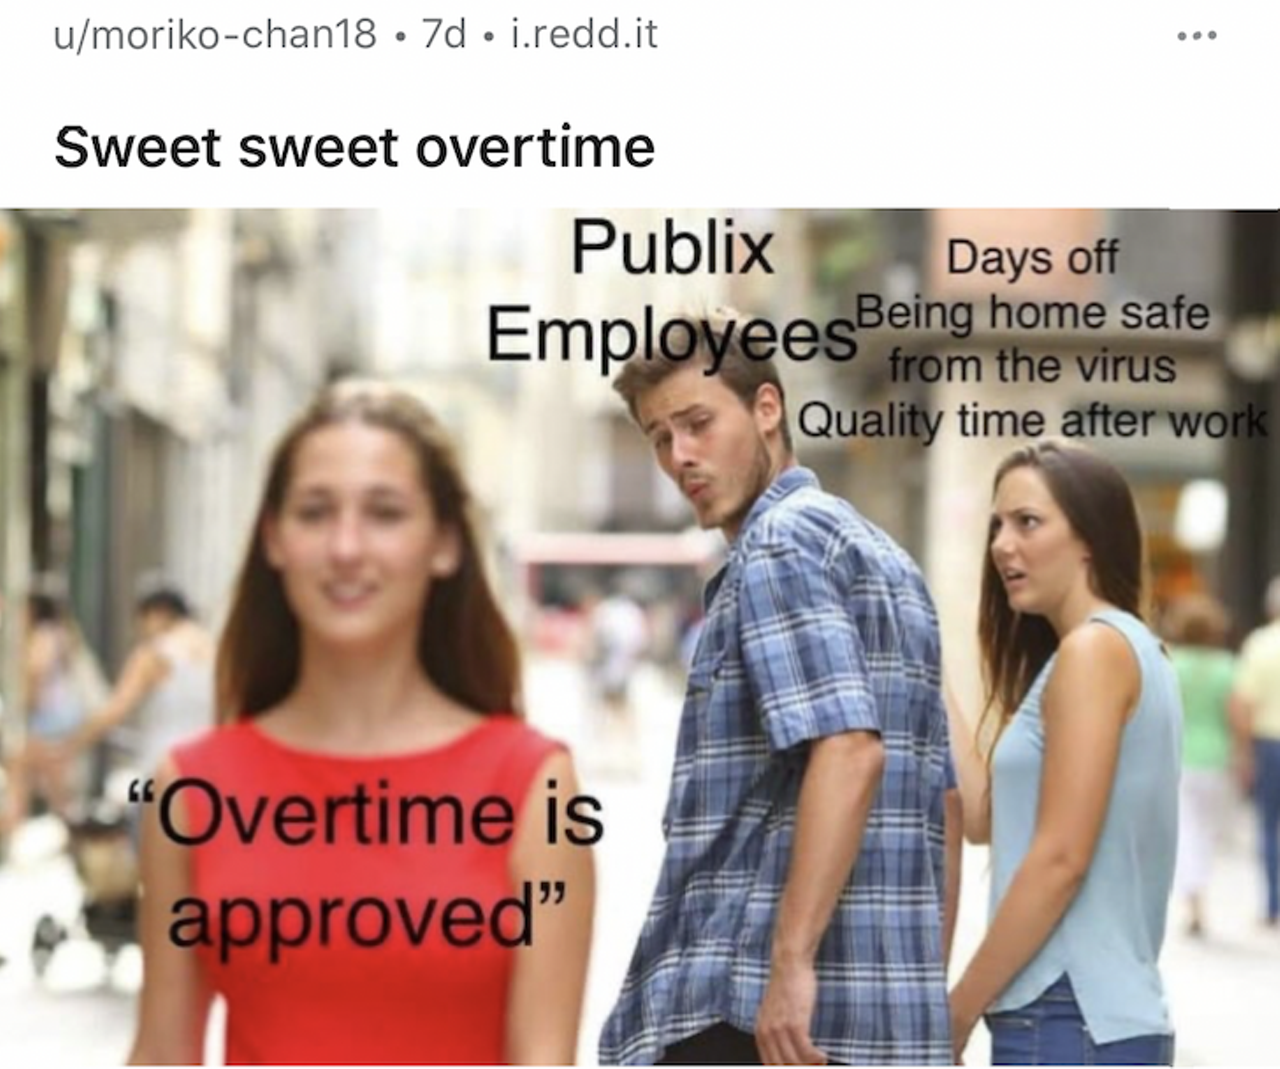 Publix employees are on the coronavirus frontlines, here's what they're saying